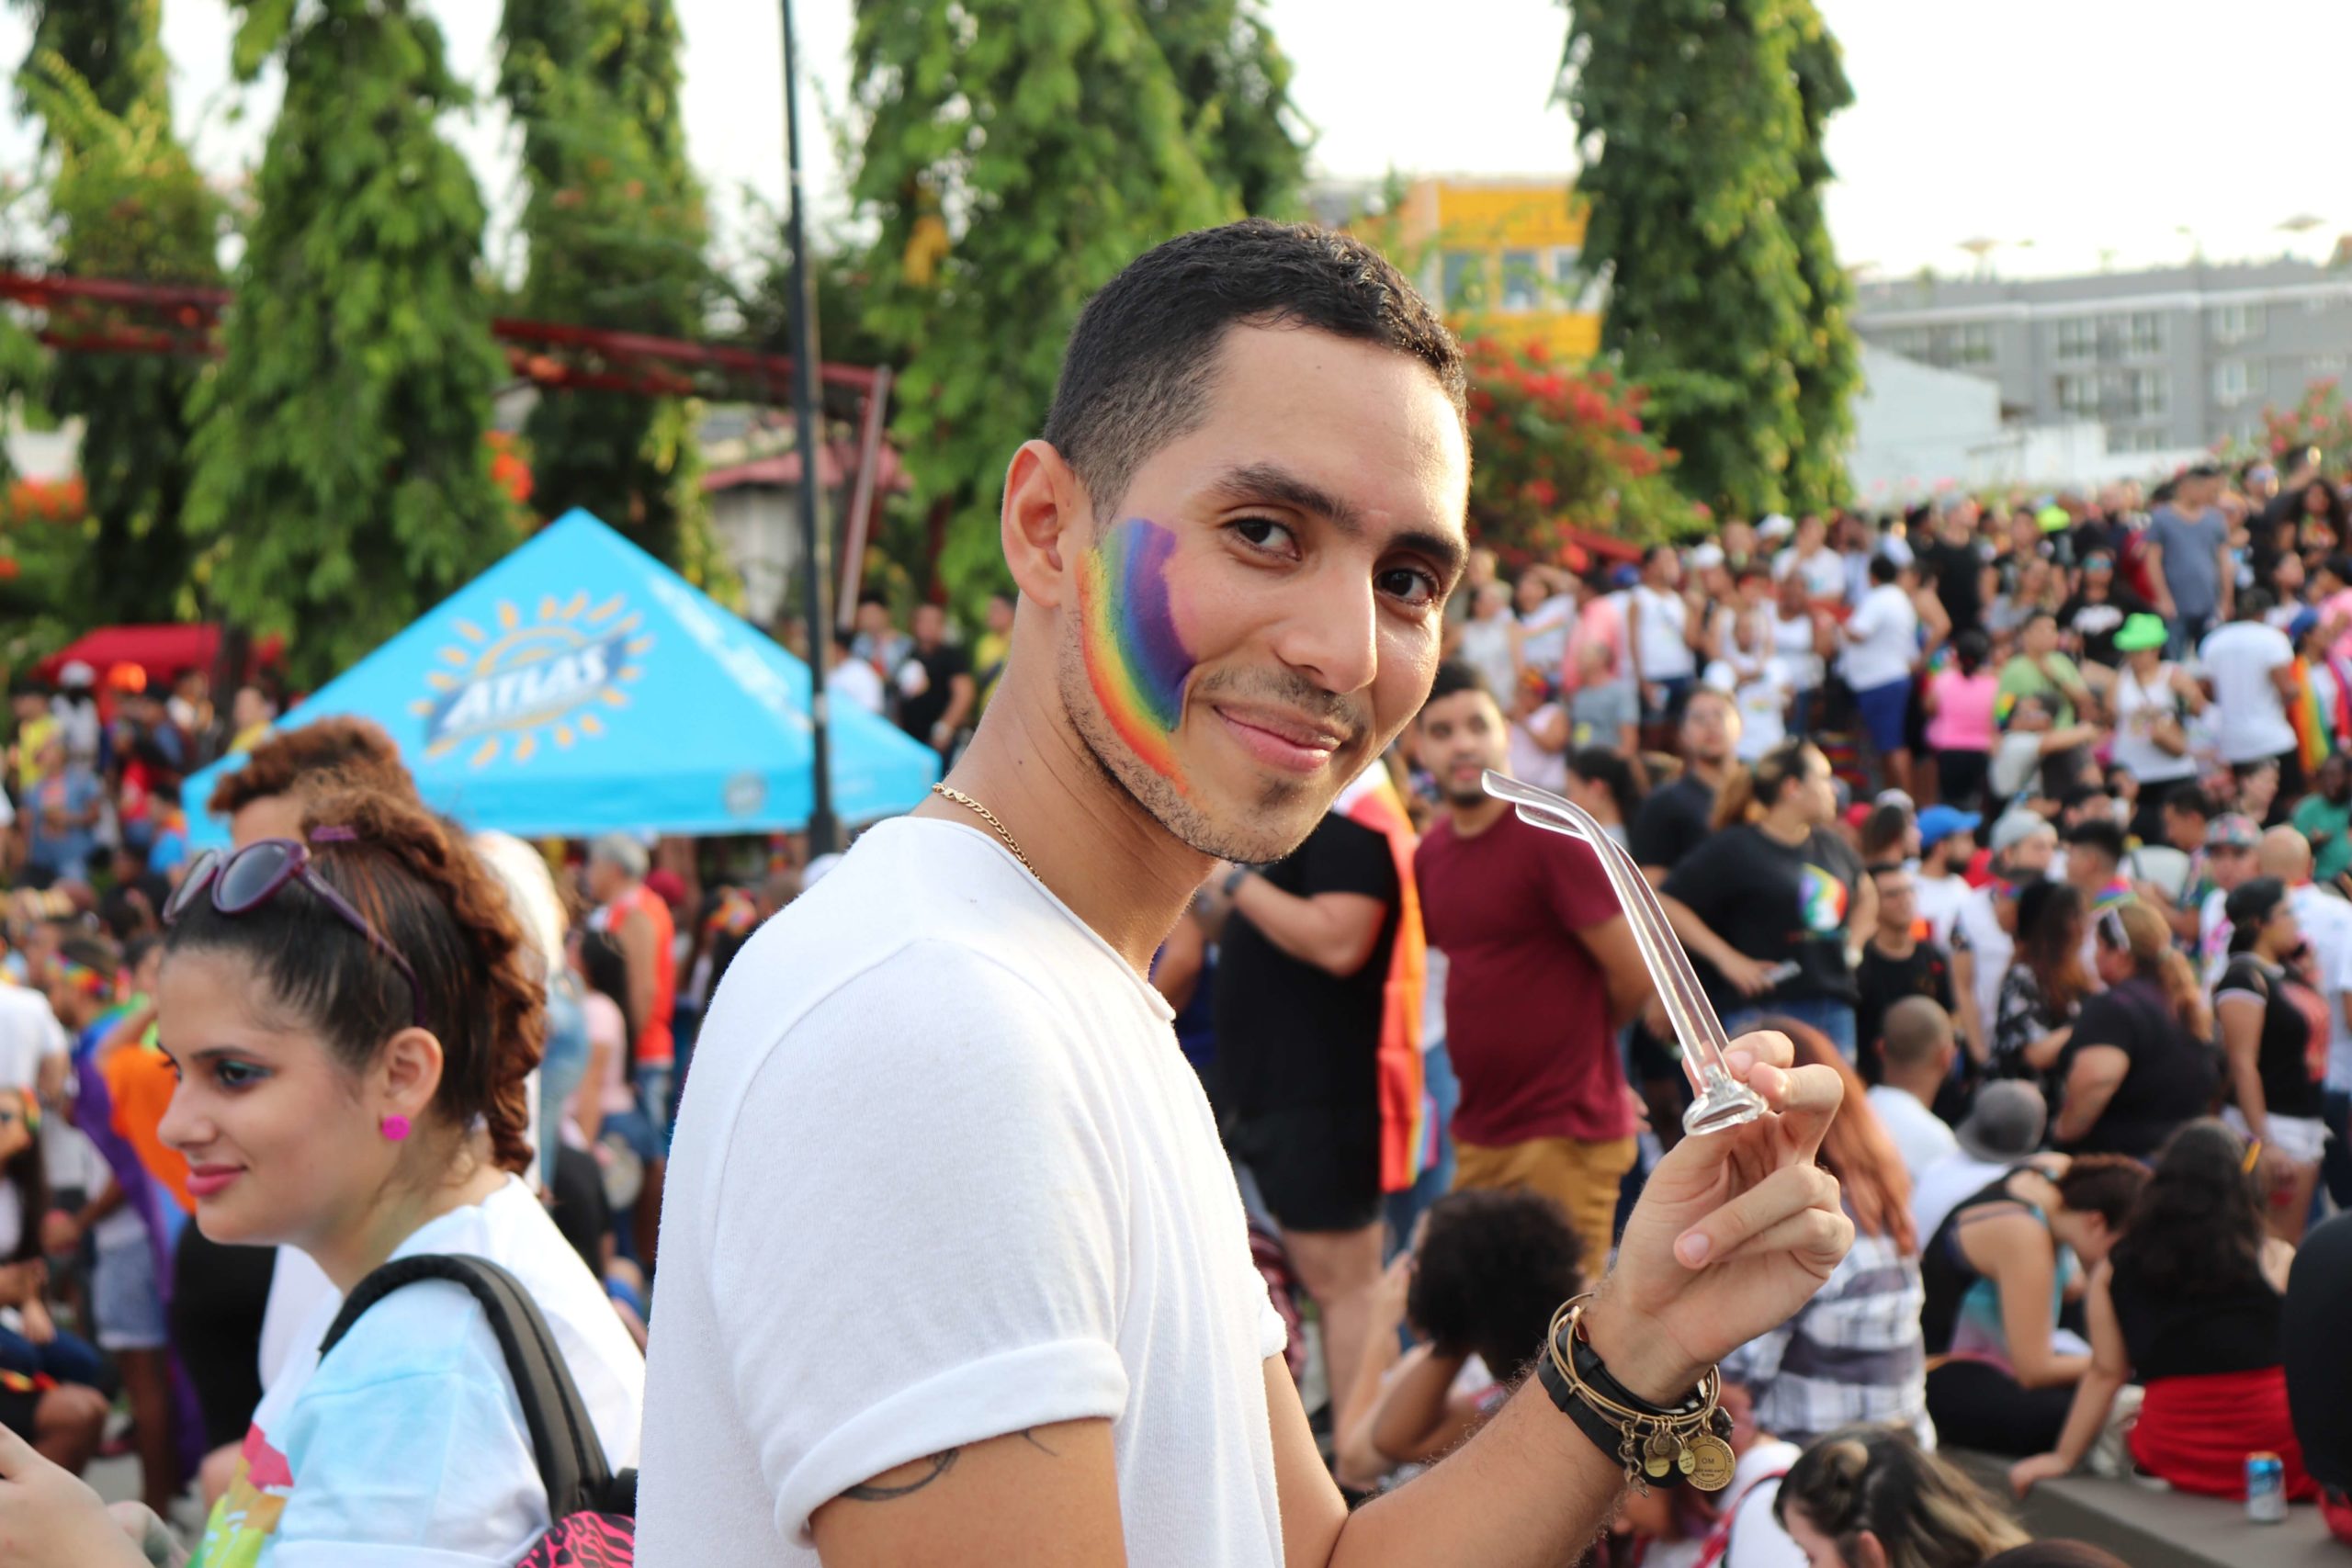 young person with rainbow temporary tattoo on their cheek